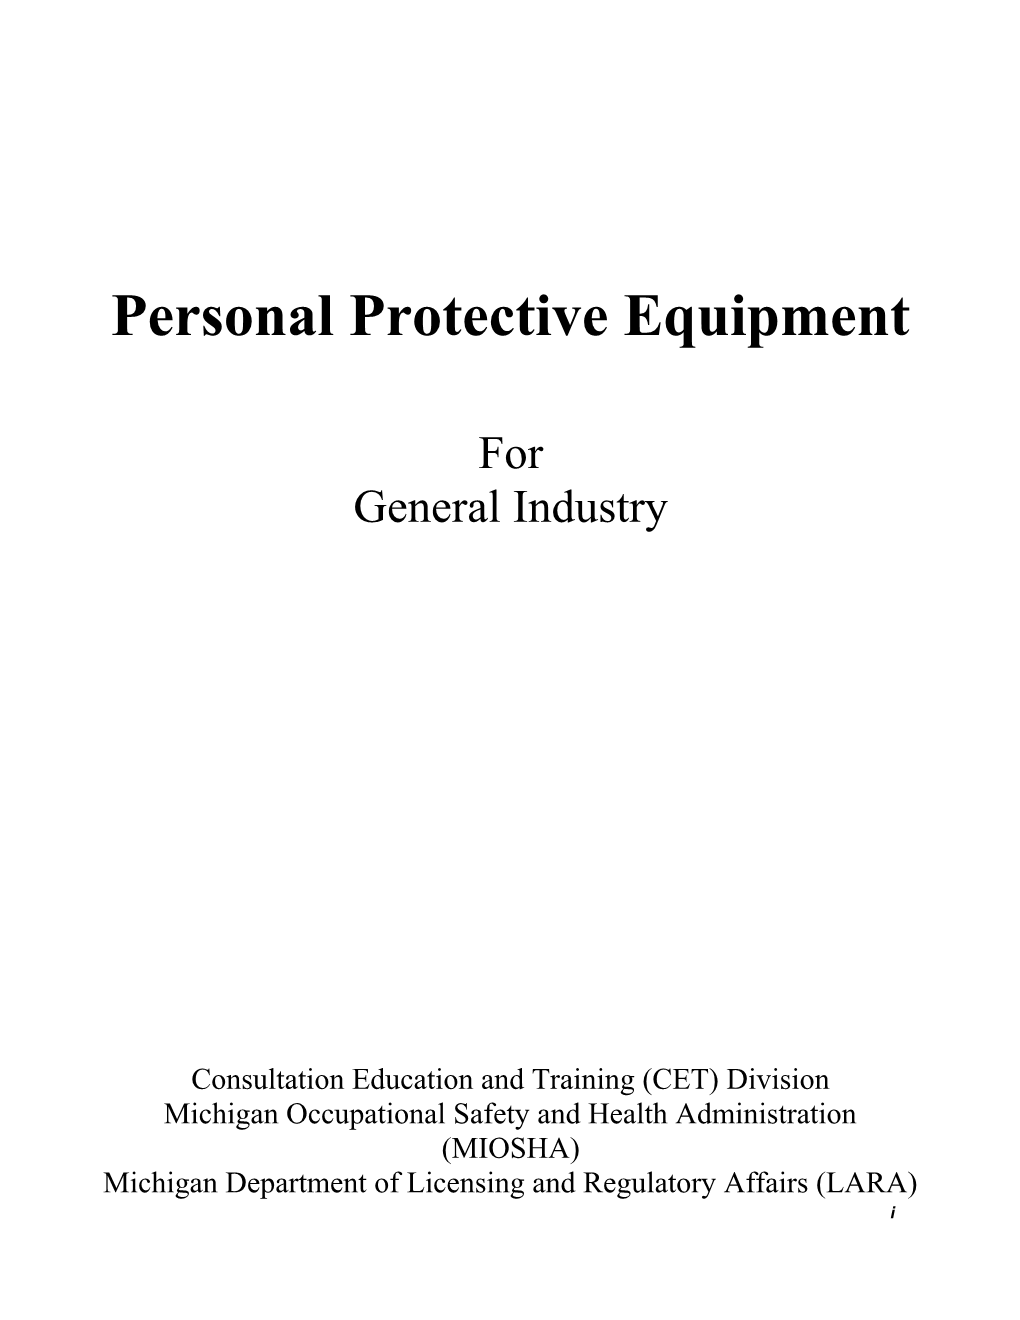 Personal Protective Equipment for General Industry